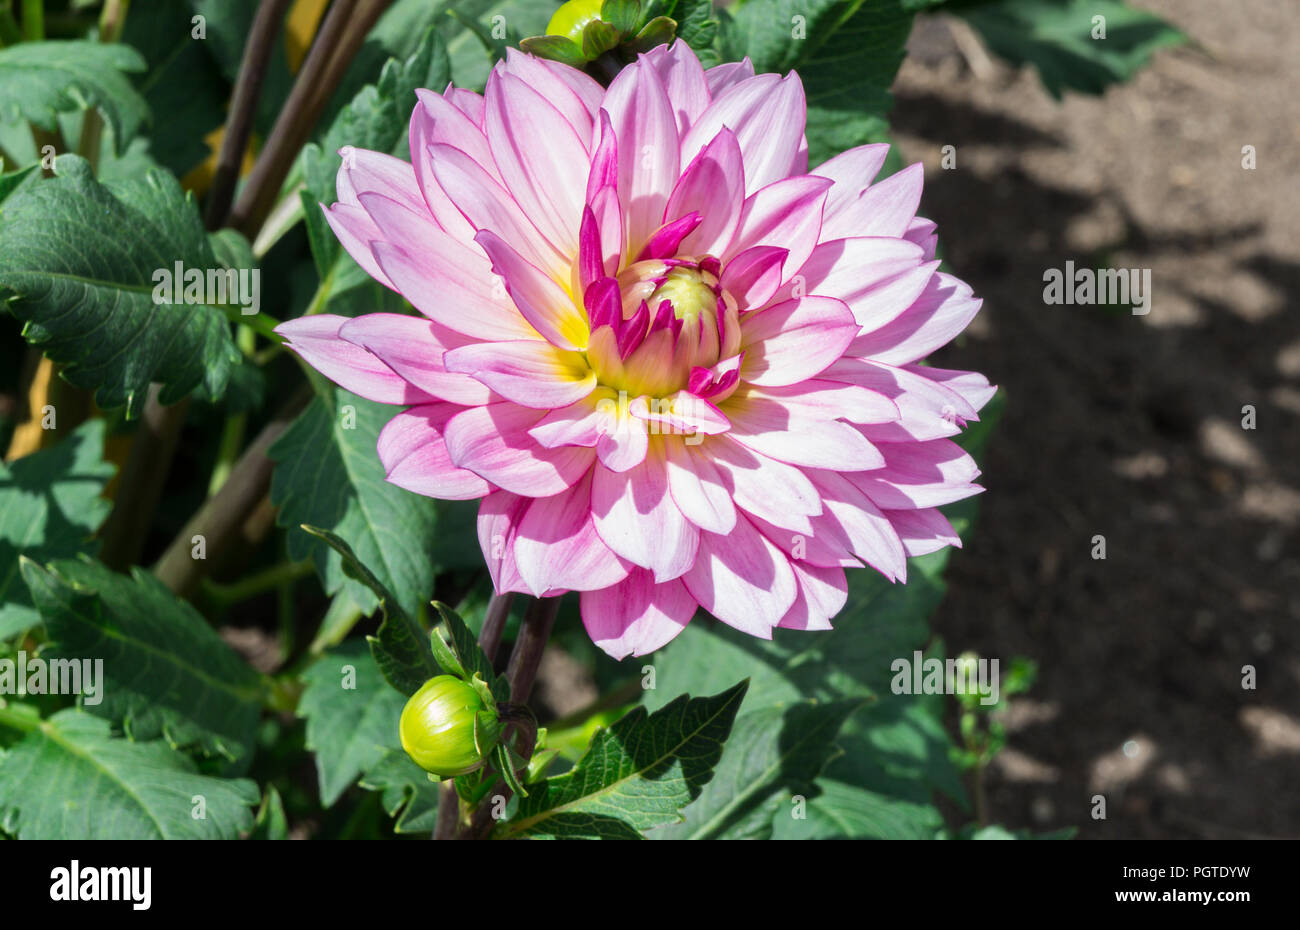 asteraceae dahlia cultorum grade canopus white and pink yellow core large flowers asters in bloom and buds,one flower,beautiful plant, autumn Stock Photo